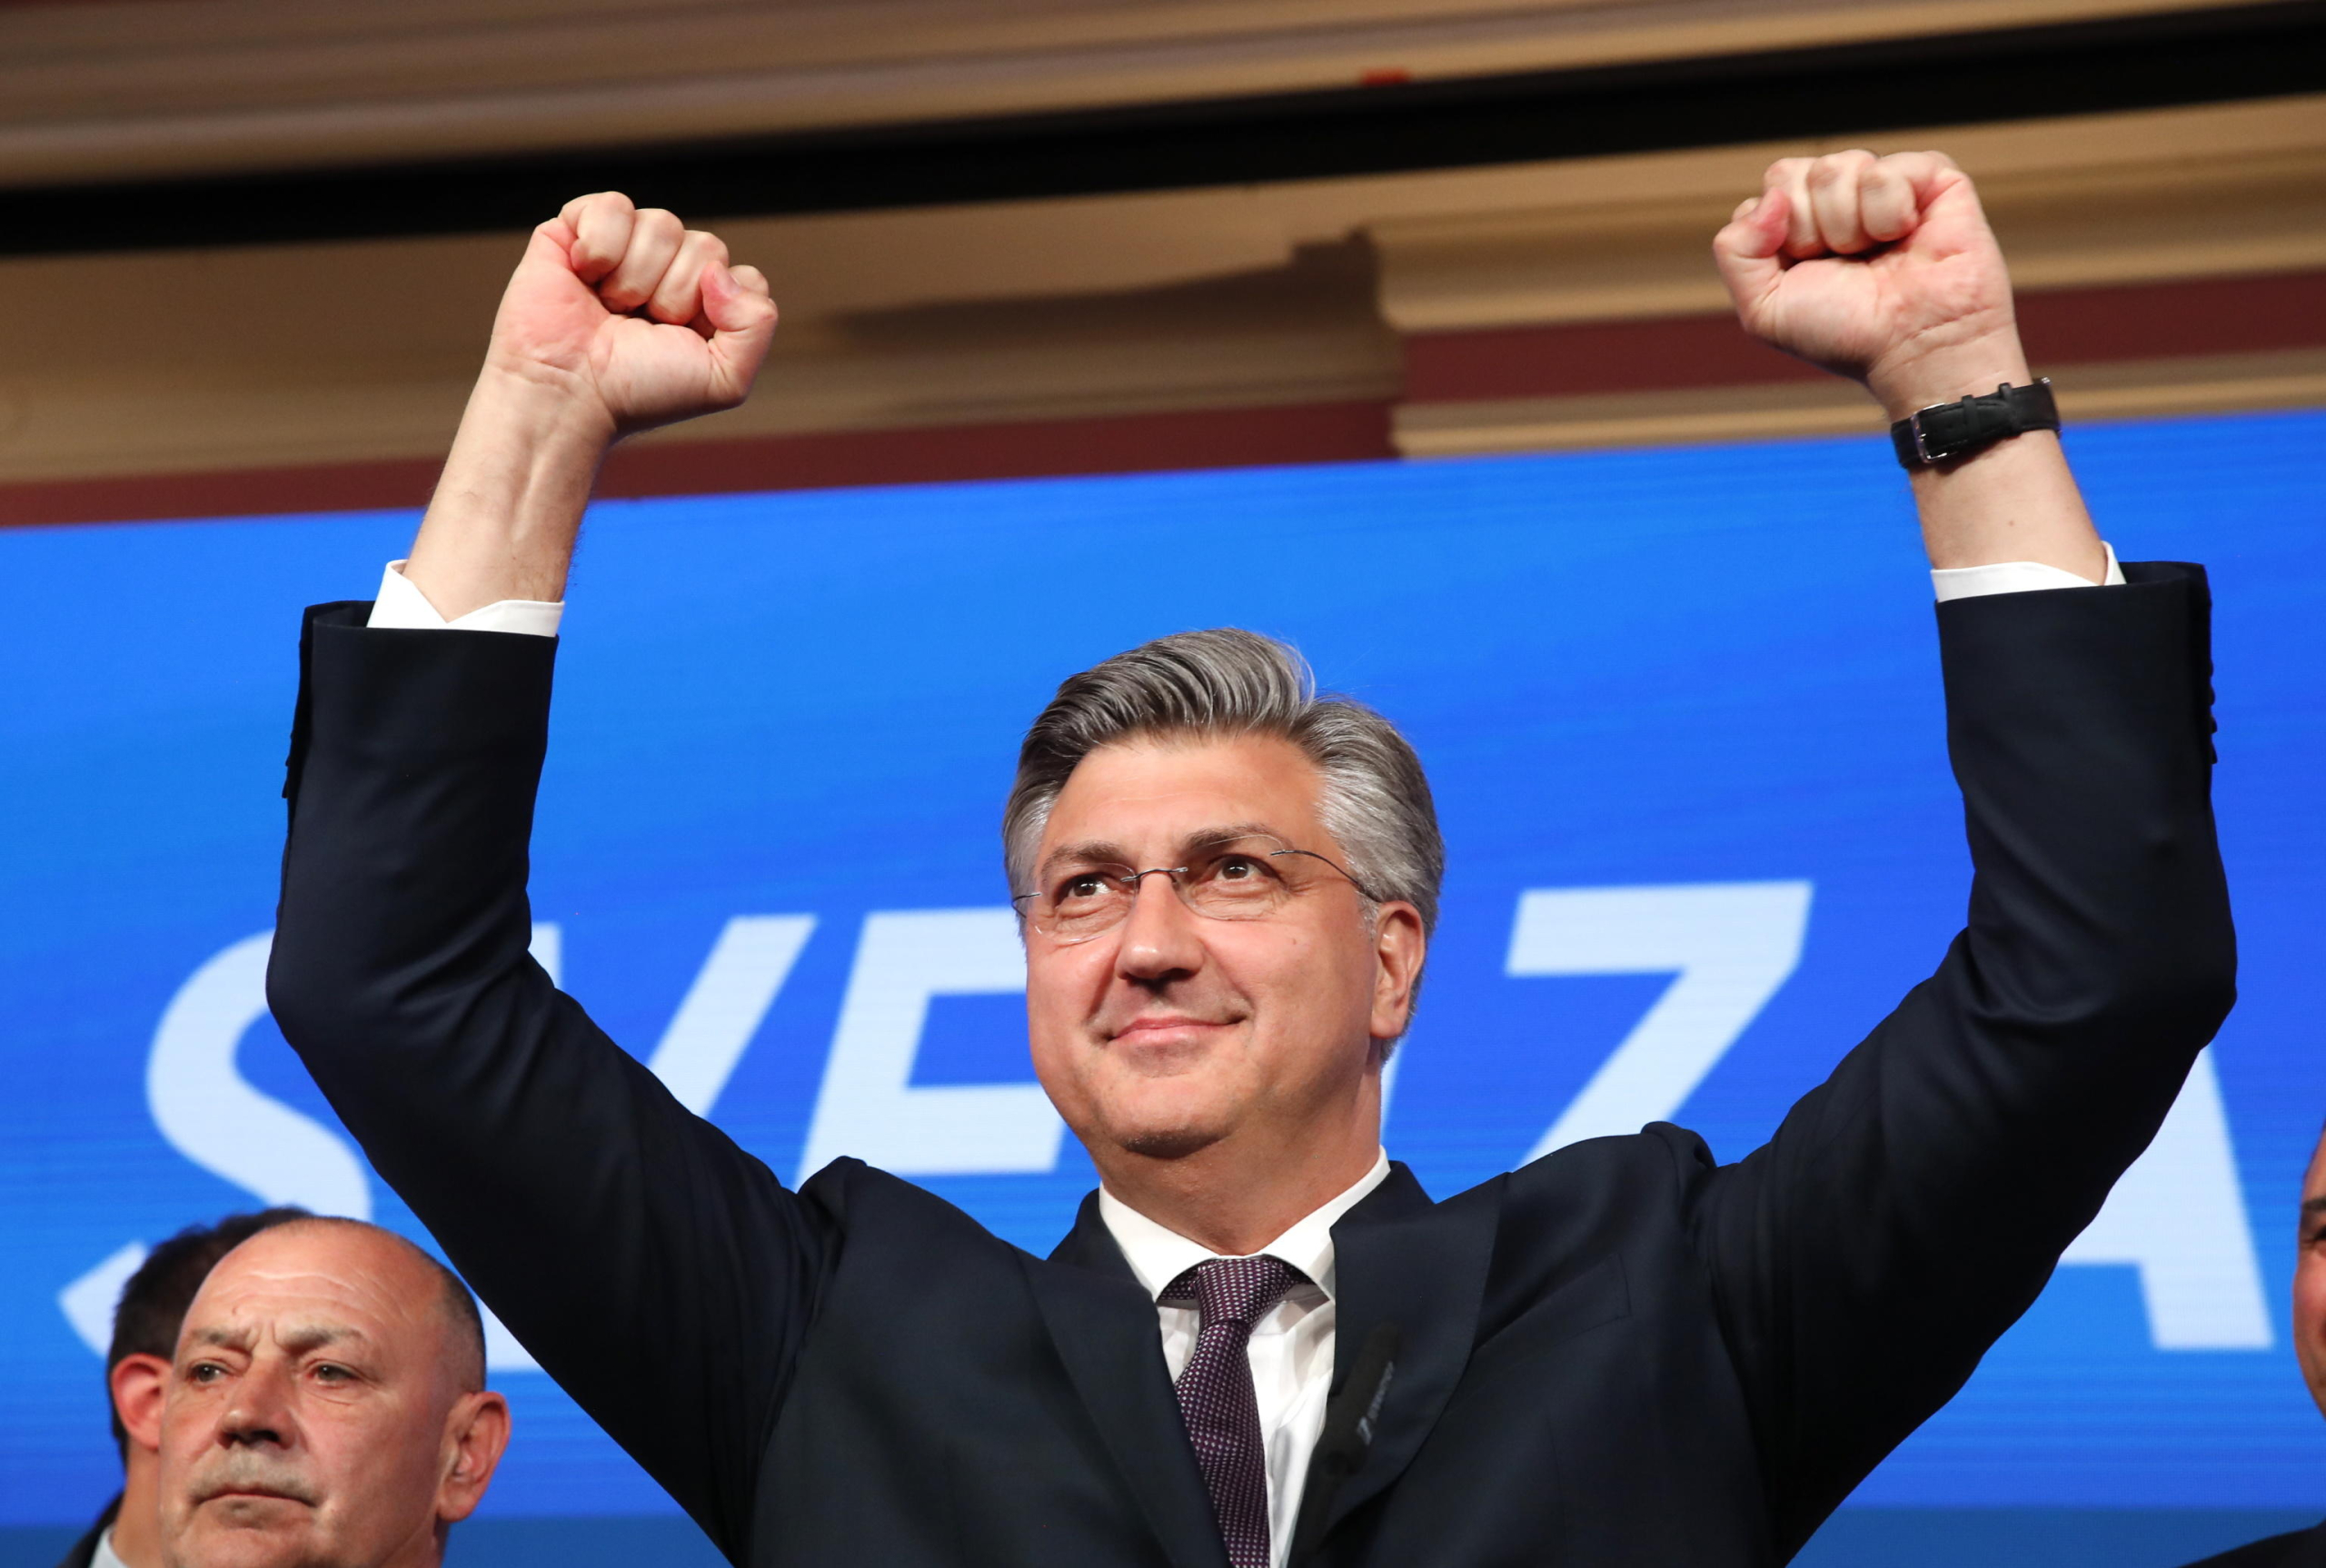 epa11285651 Croatian Prime Minister Andrej Plenkovic from the Croatian Democratic Union (HDZ) reacts to his victory during the Parliamentary elections, at their head quaters in Zagreb, Croatia, 17 April 2024. Voters in the country are casting their ballots to elect 151 members of Sabor, the Parliament of Croatia.  EPA/ANTONIO BAT